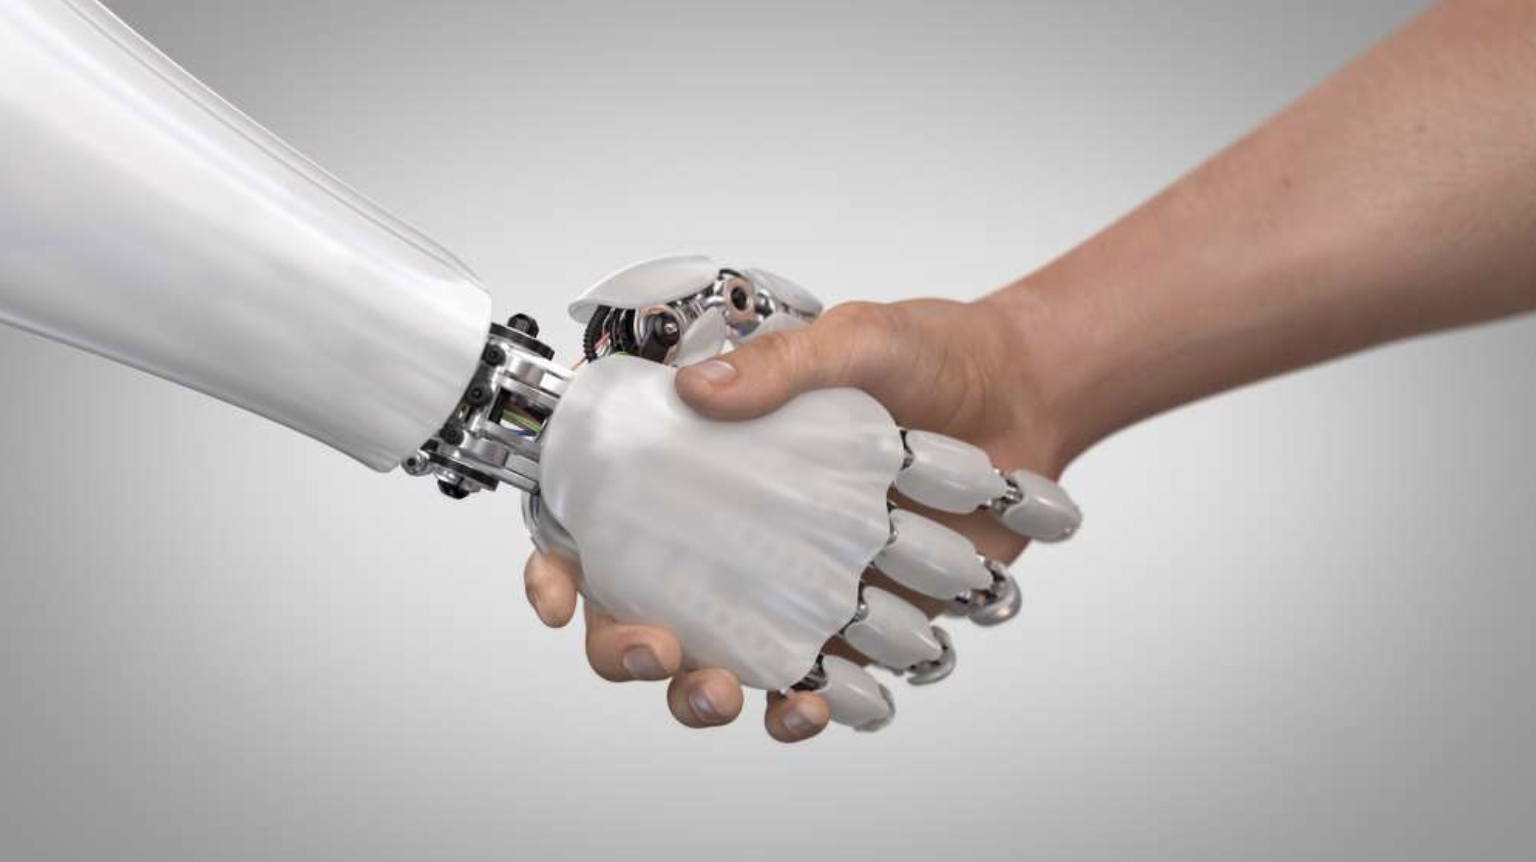 Robot and Human Shaking Hands